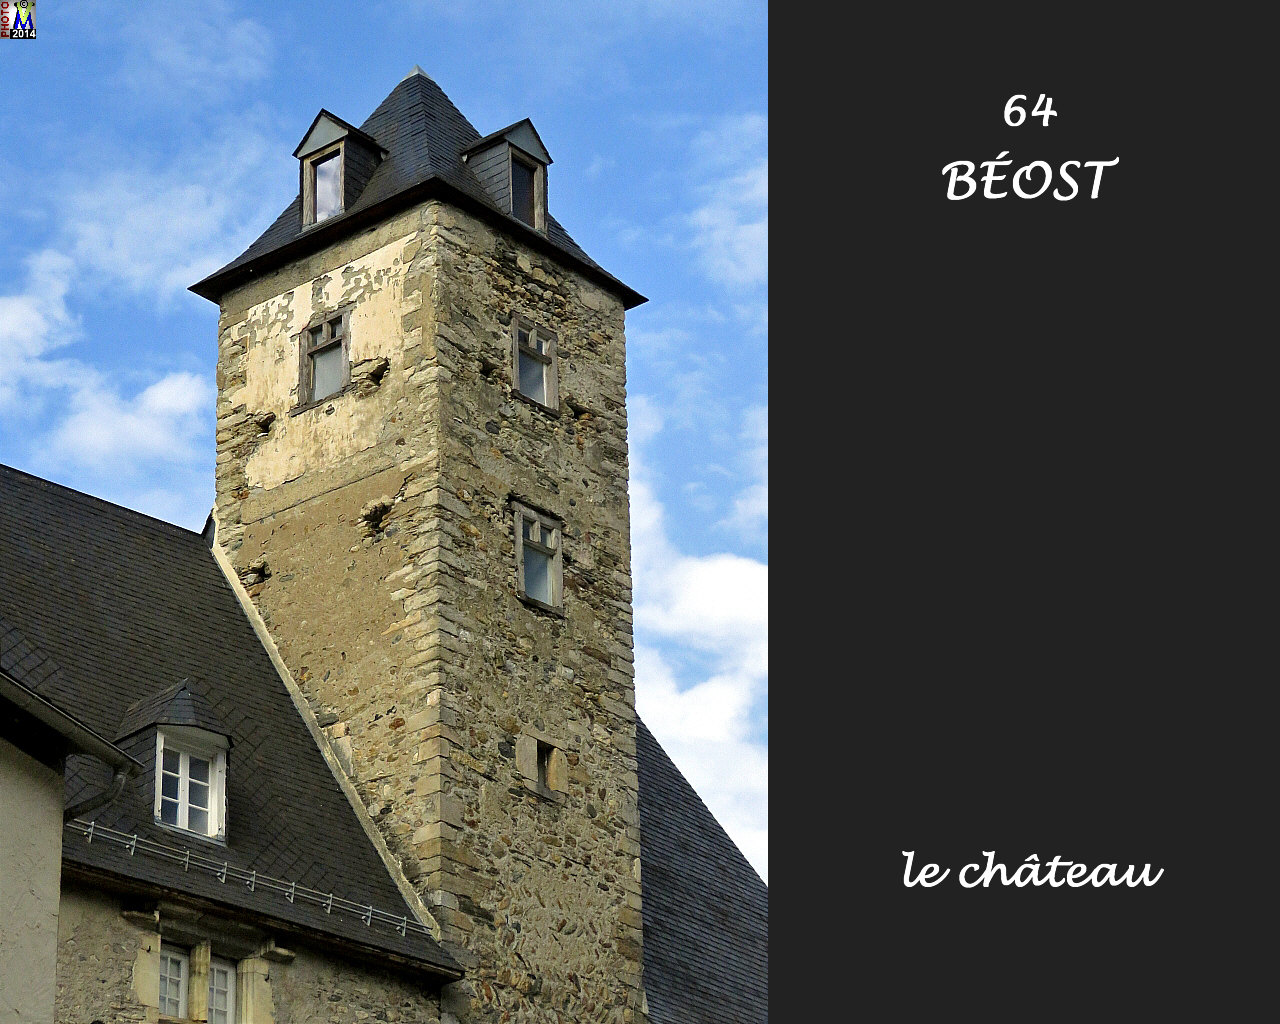 64BEOST_chateau_104.jpg